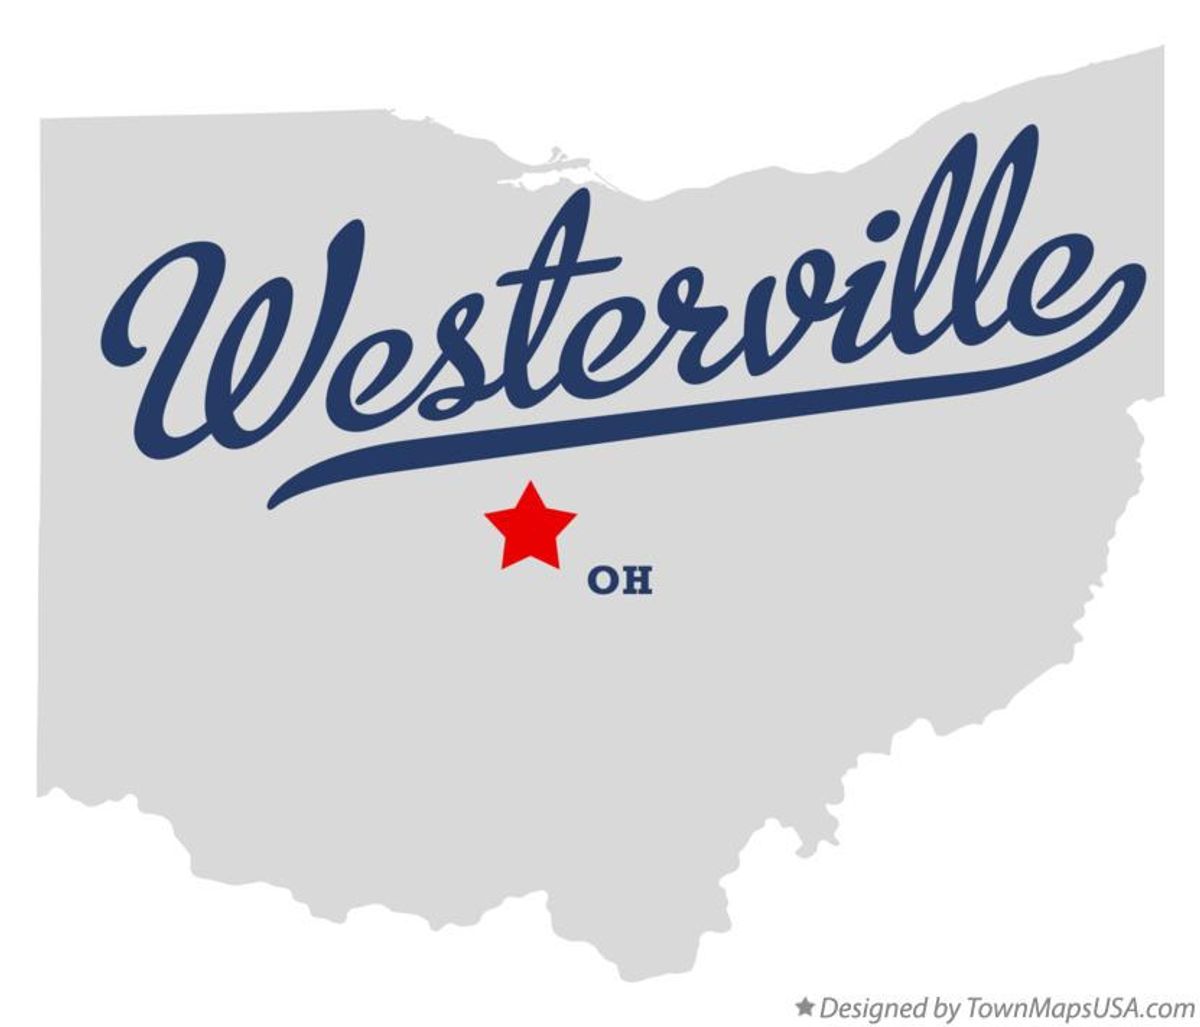 Reasons To Live In Westerville, Ohio